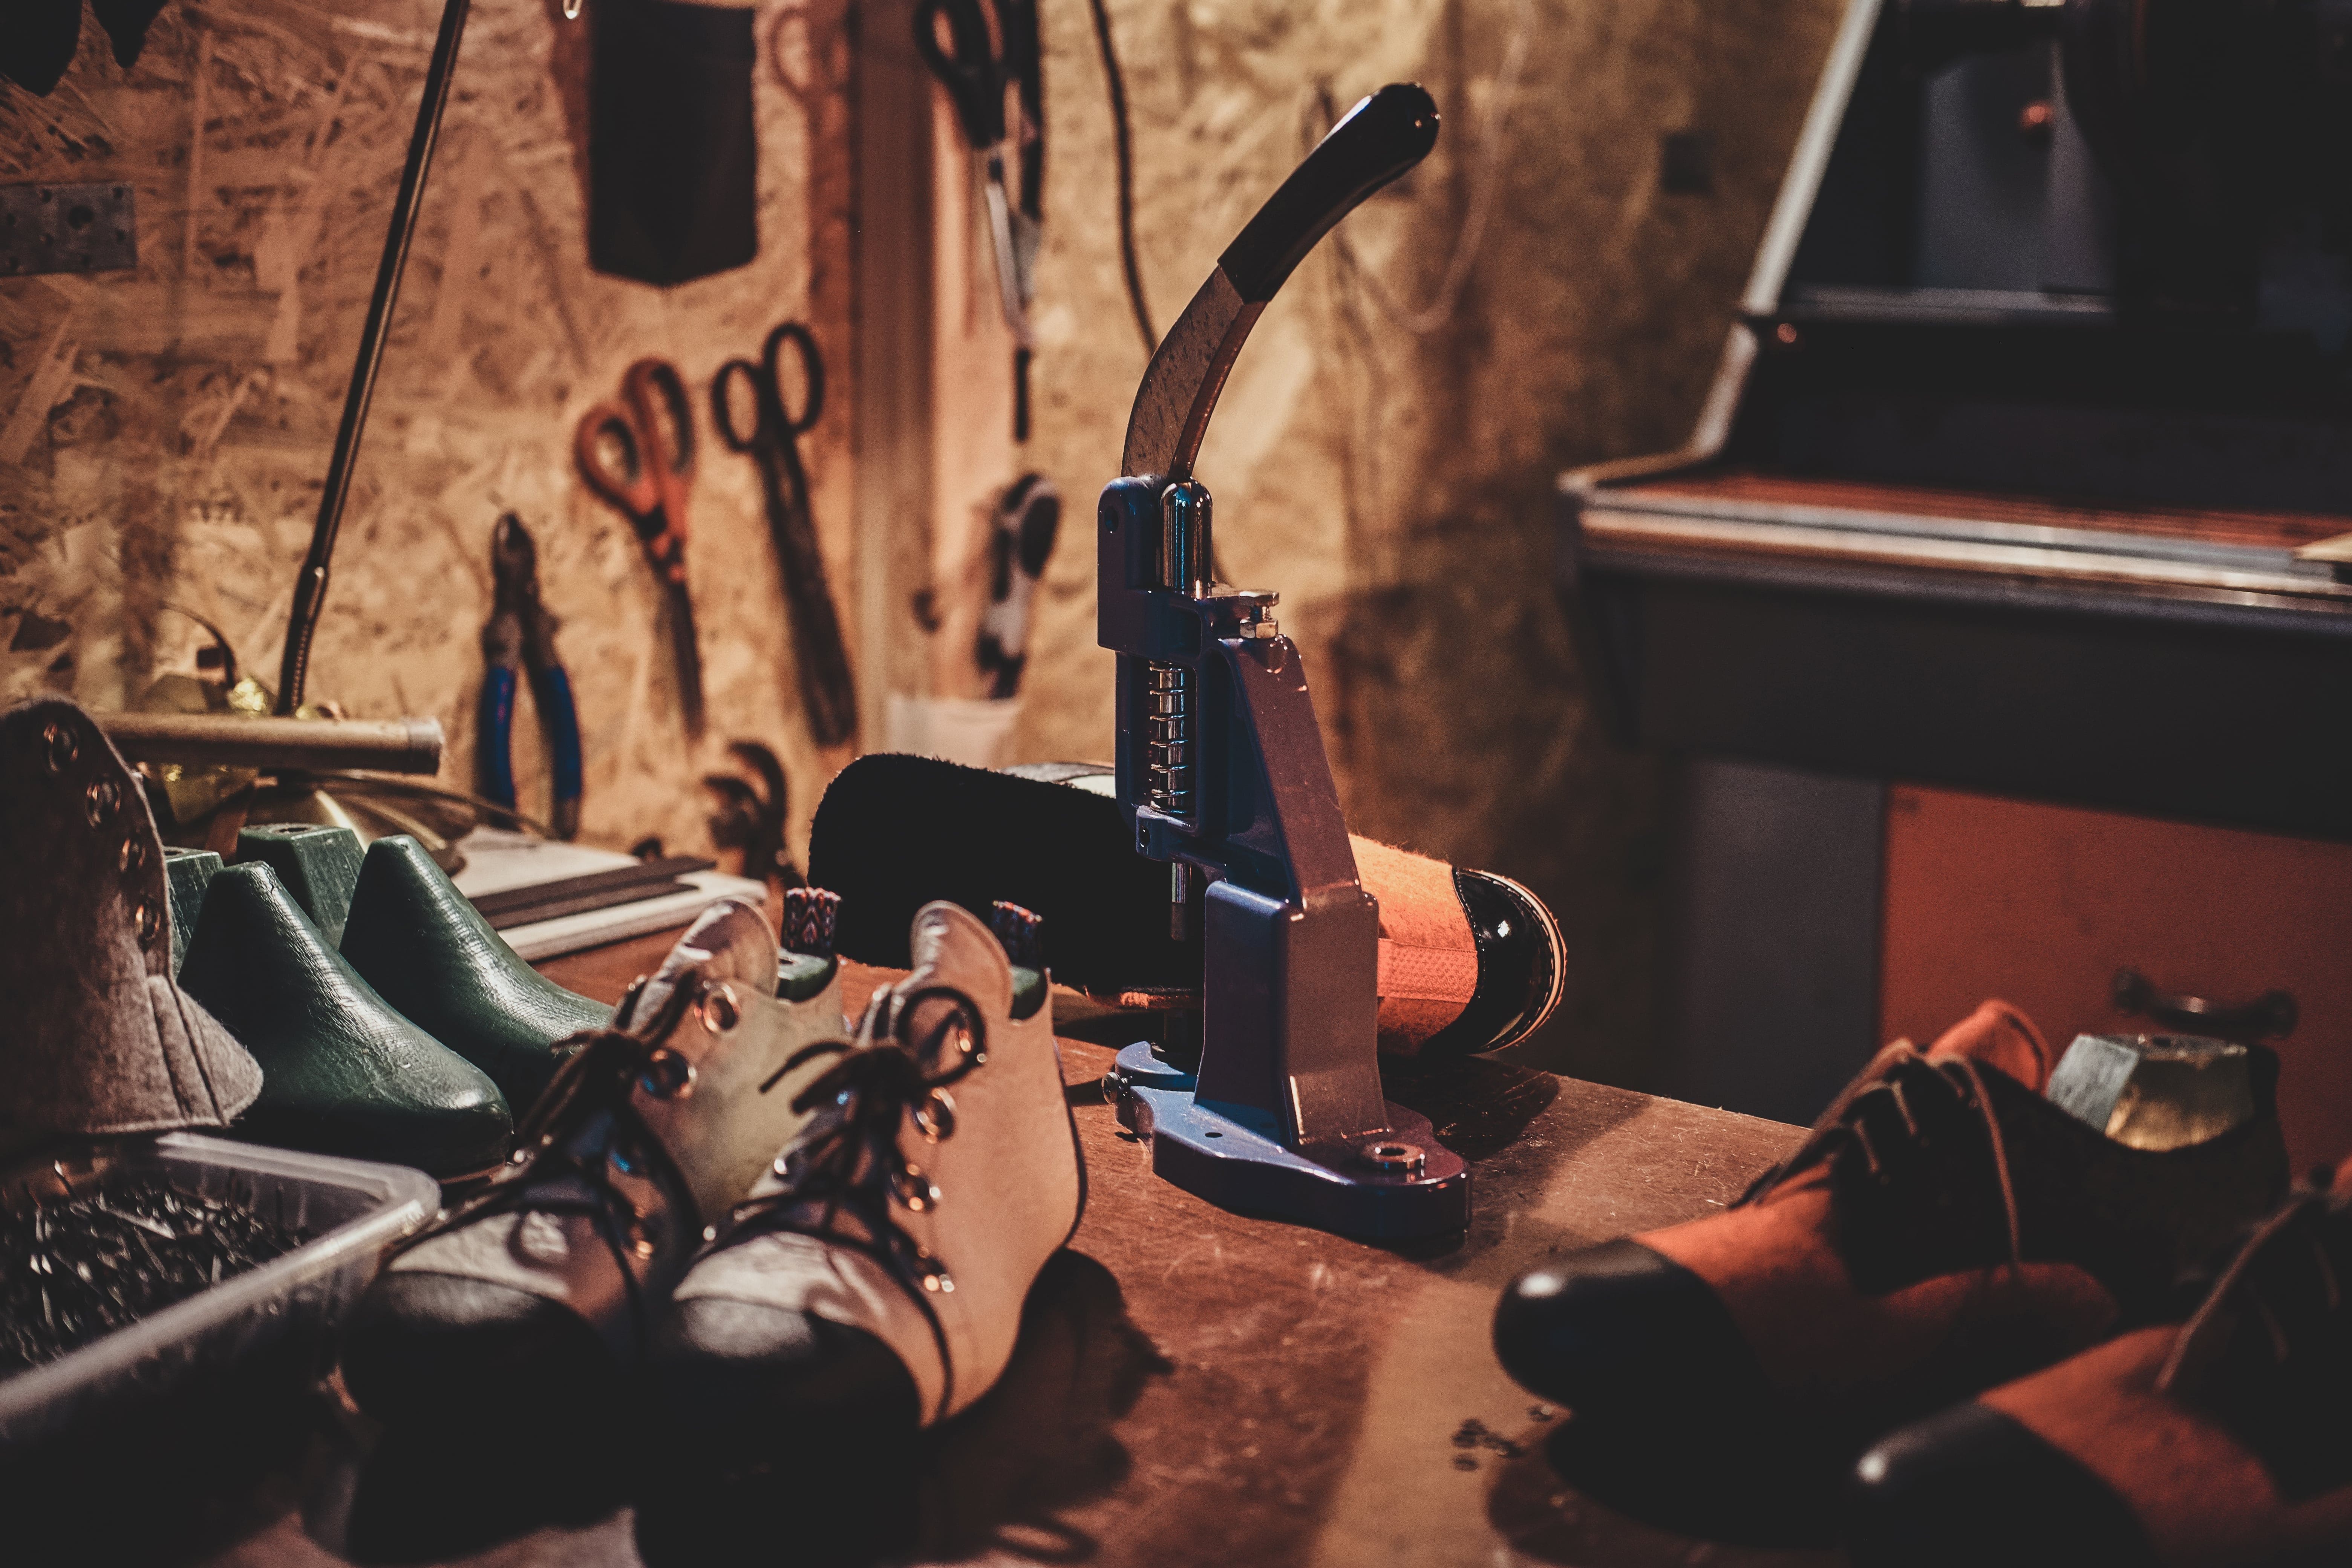 machine-tool-table-with-shoes-making-holes-laces-cobbler-s-workshops